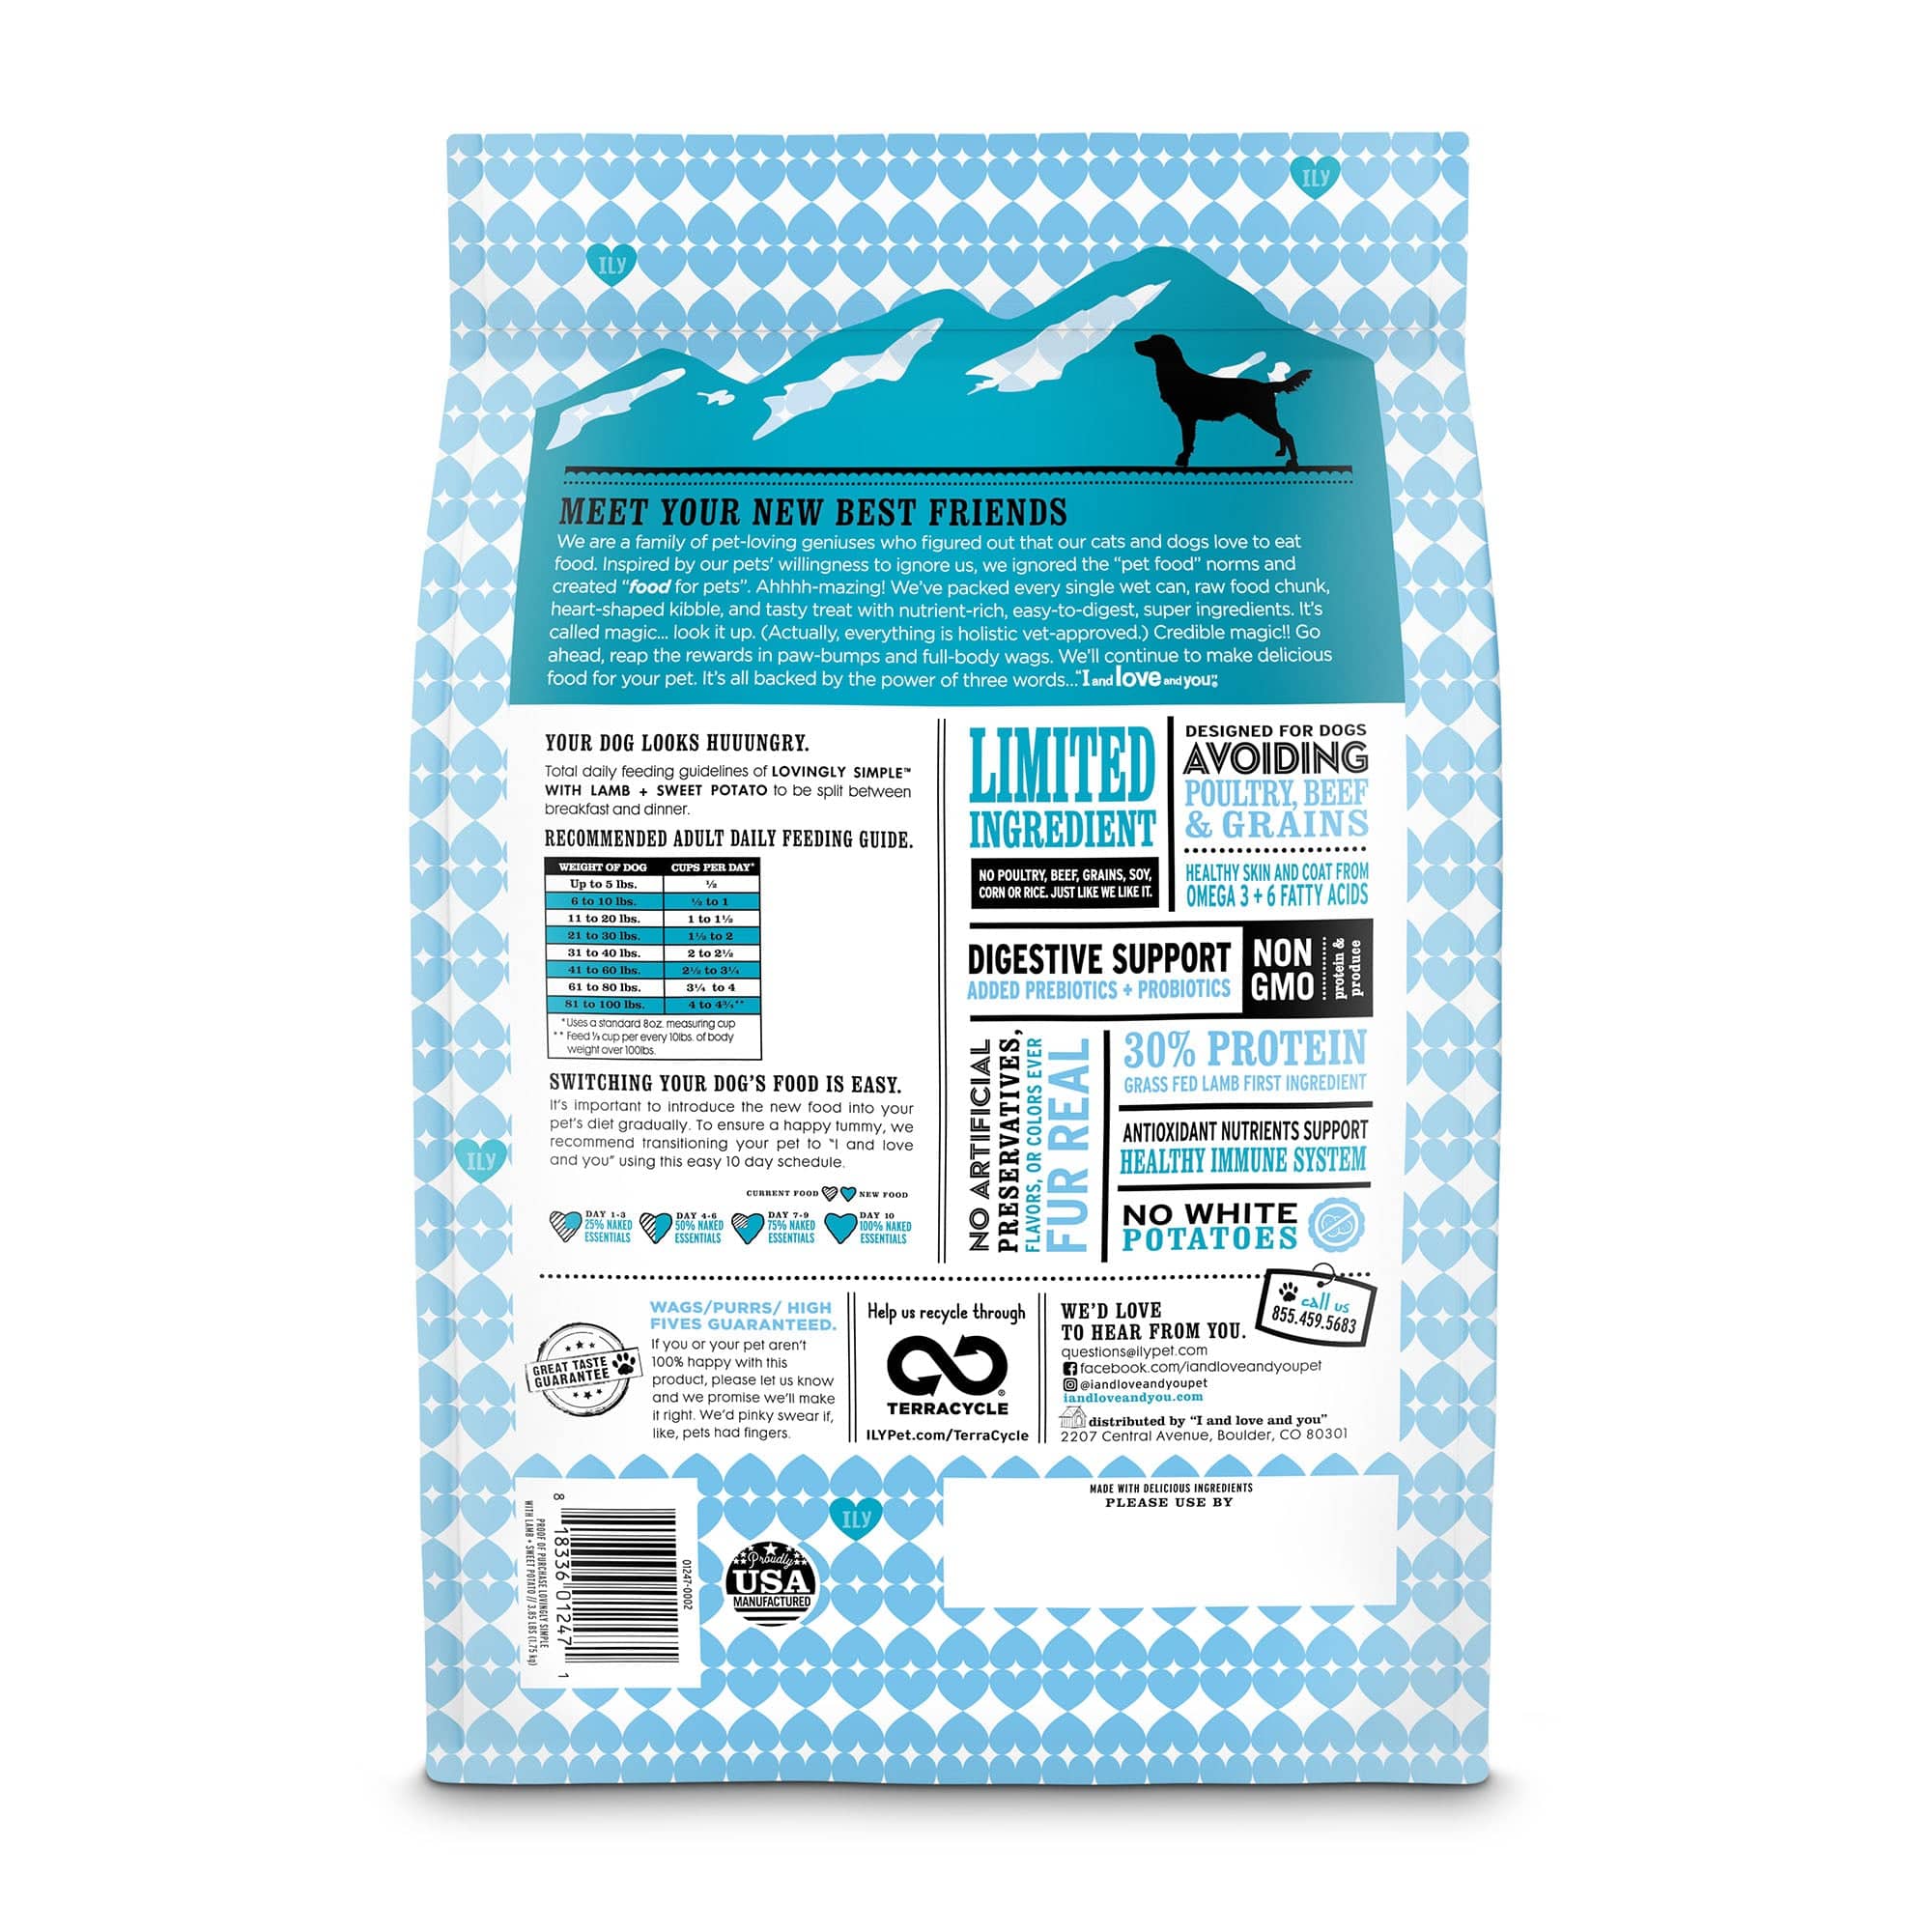 Lovingly Simple - Lamb + Sweet Potato dog food bag back side with list of ingredients, instructions and barcode